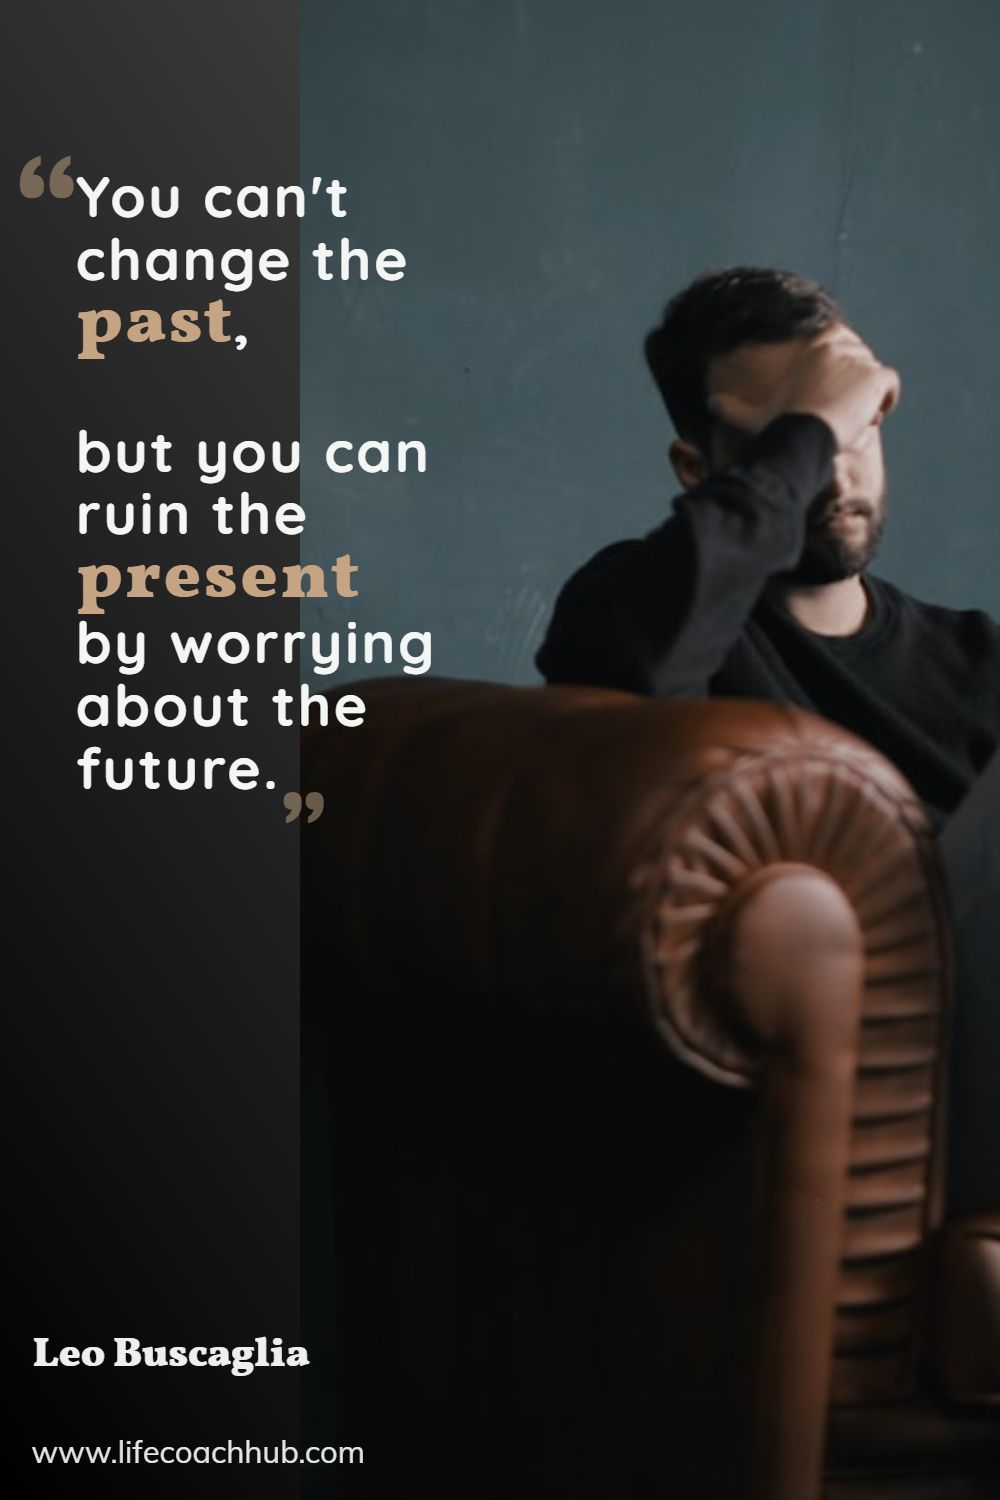 You can't change the past, but you can ruin the present by worrying about the future. Leo Buscaglia Coaching Quote